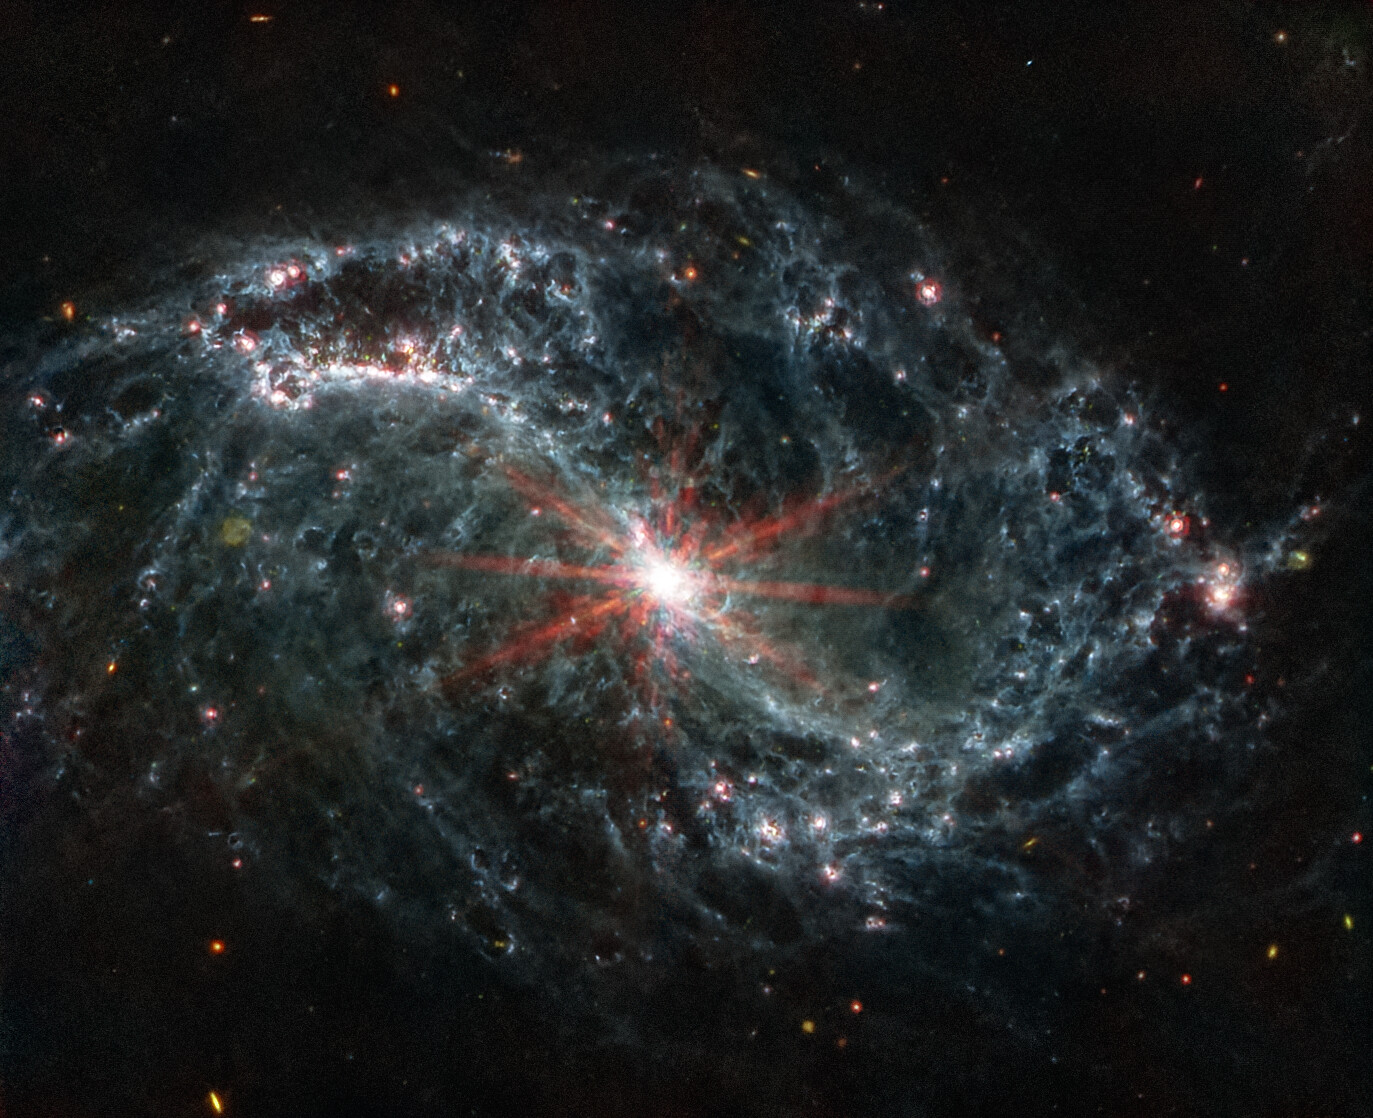 An image of a spiral galaxy in space.